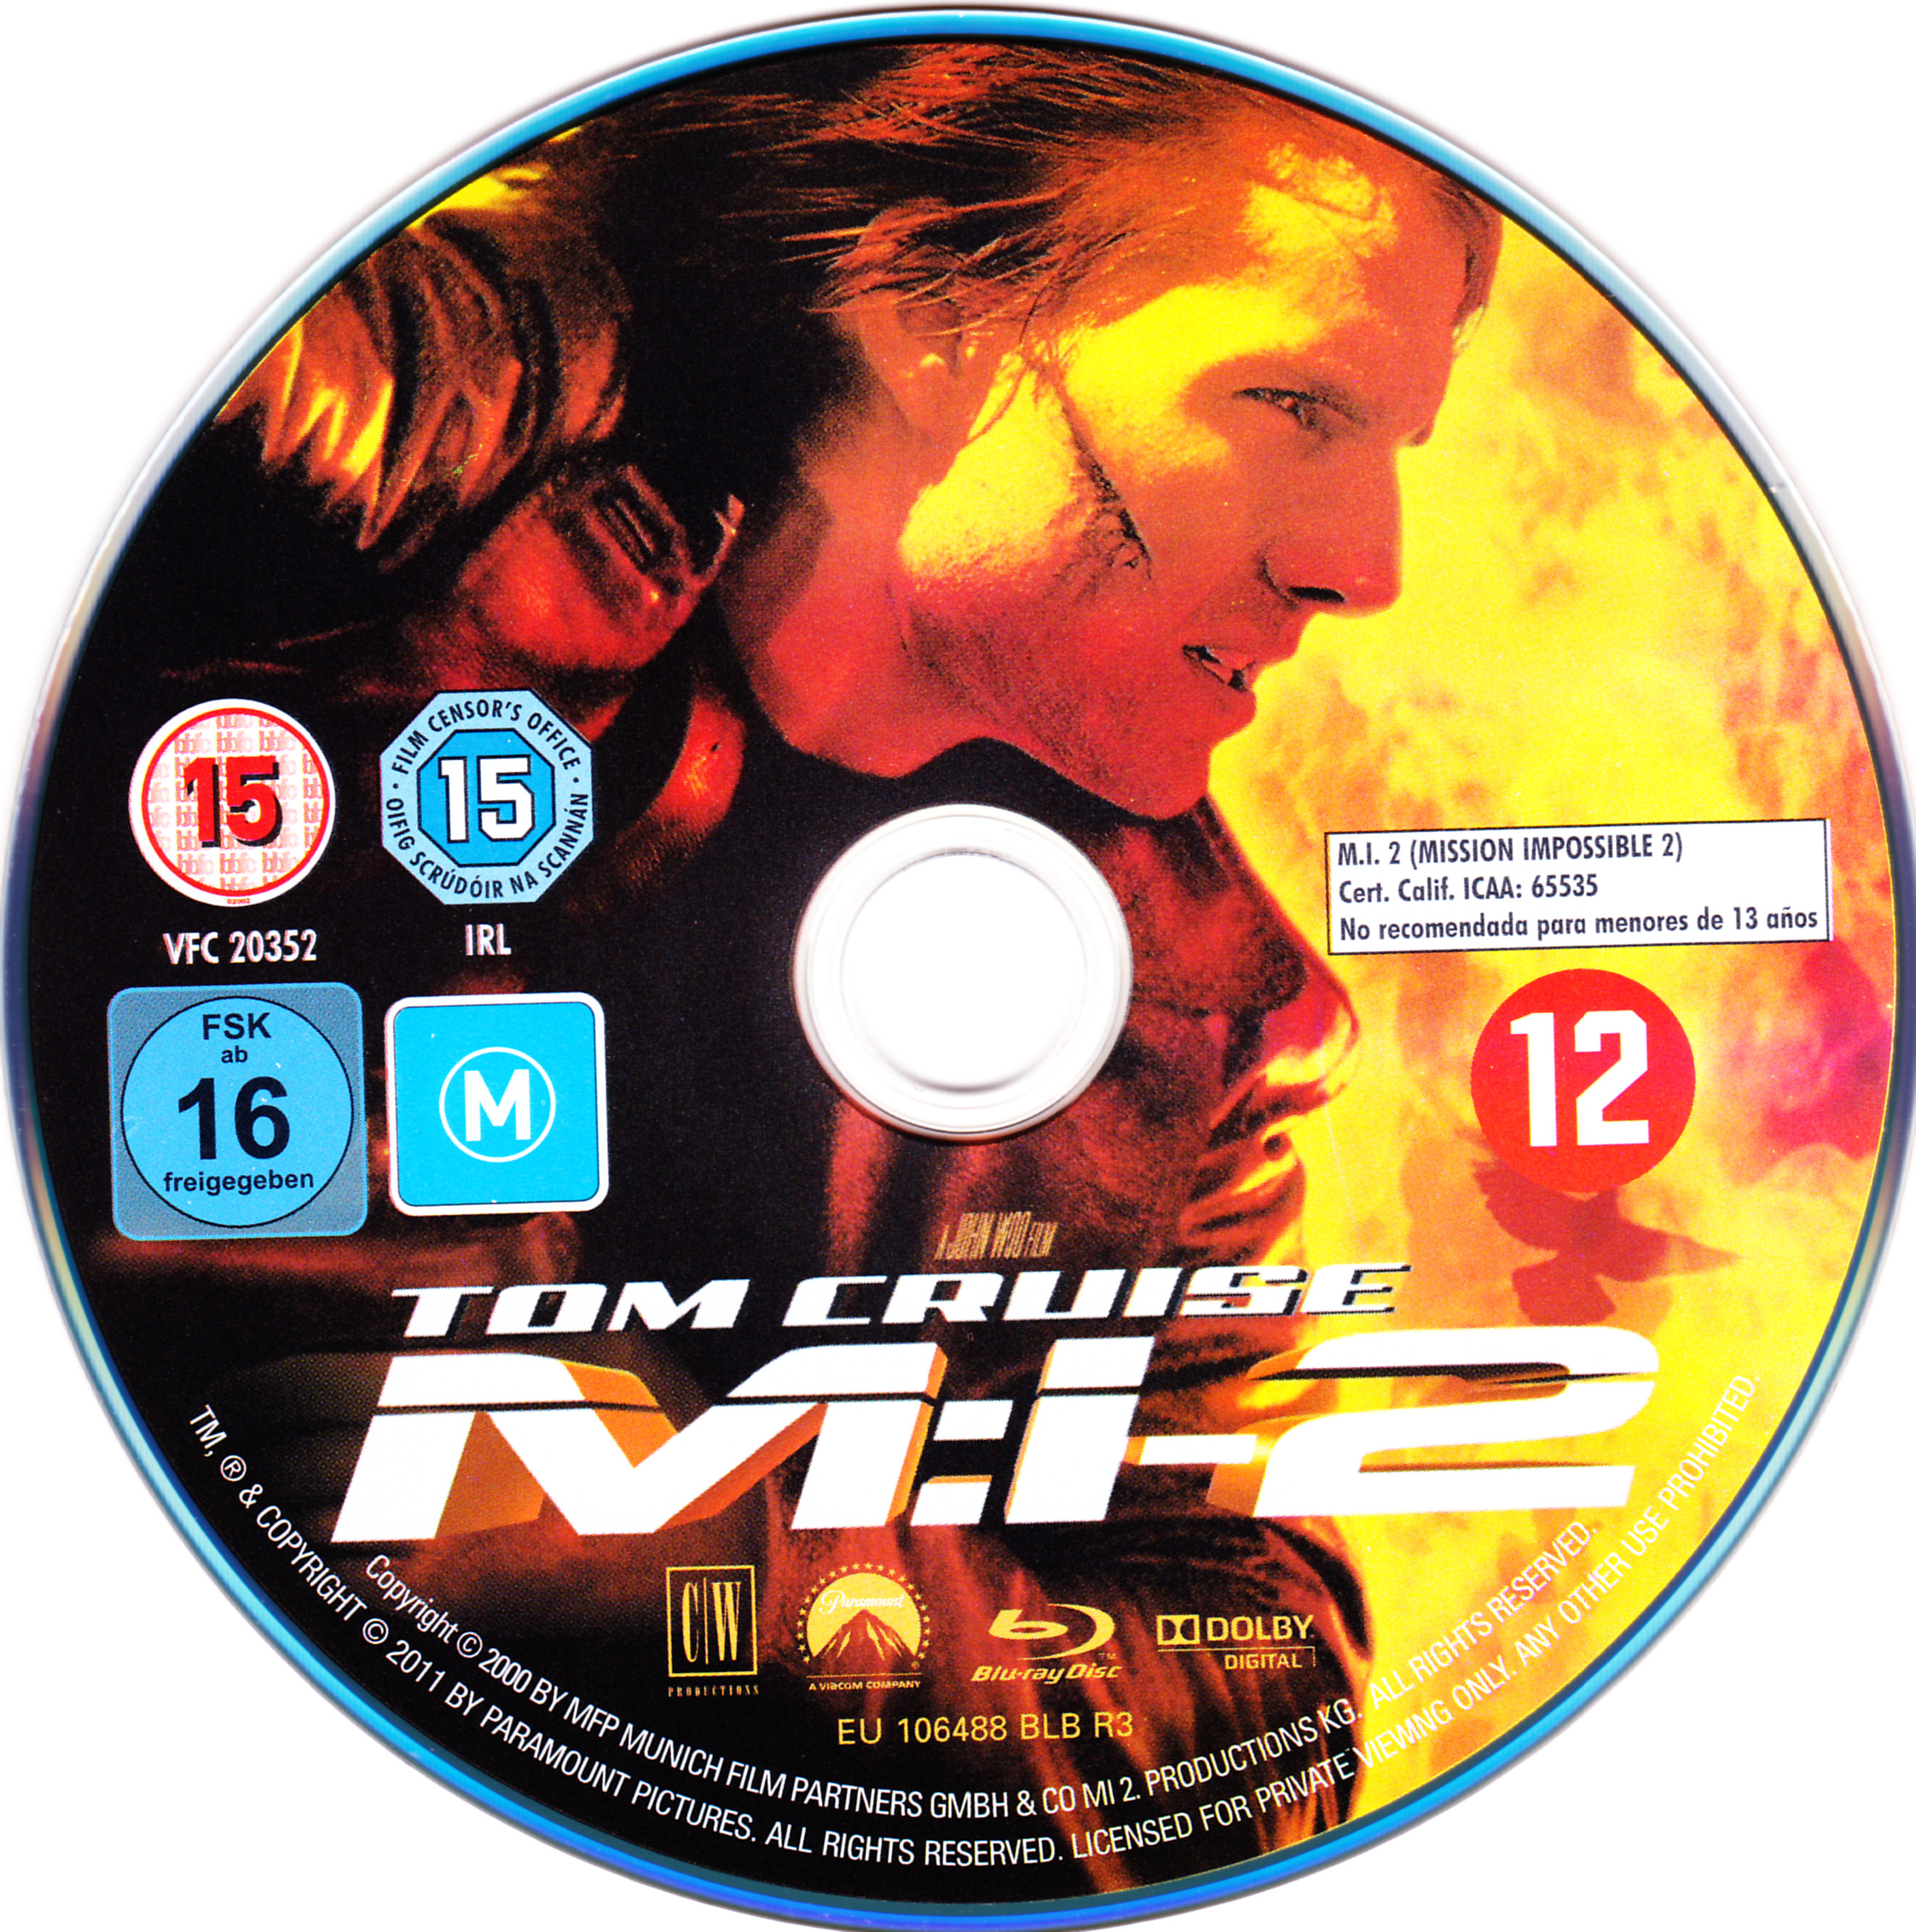 Mission impossible 2 (BLU-RAY)